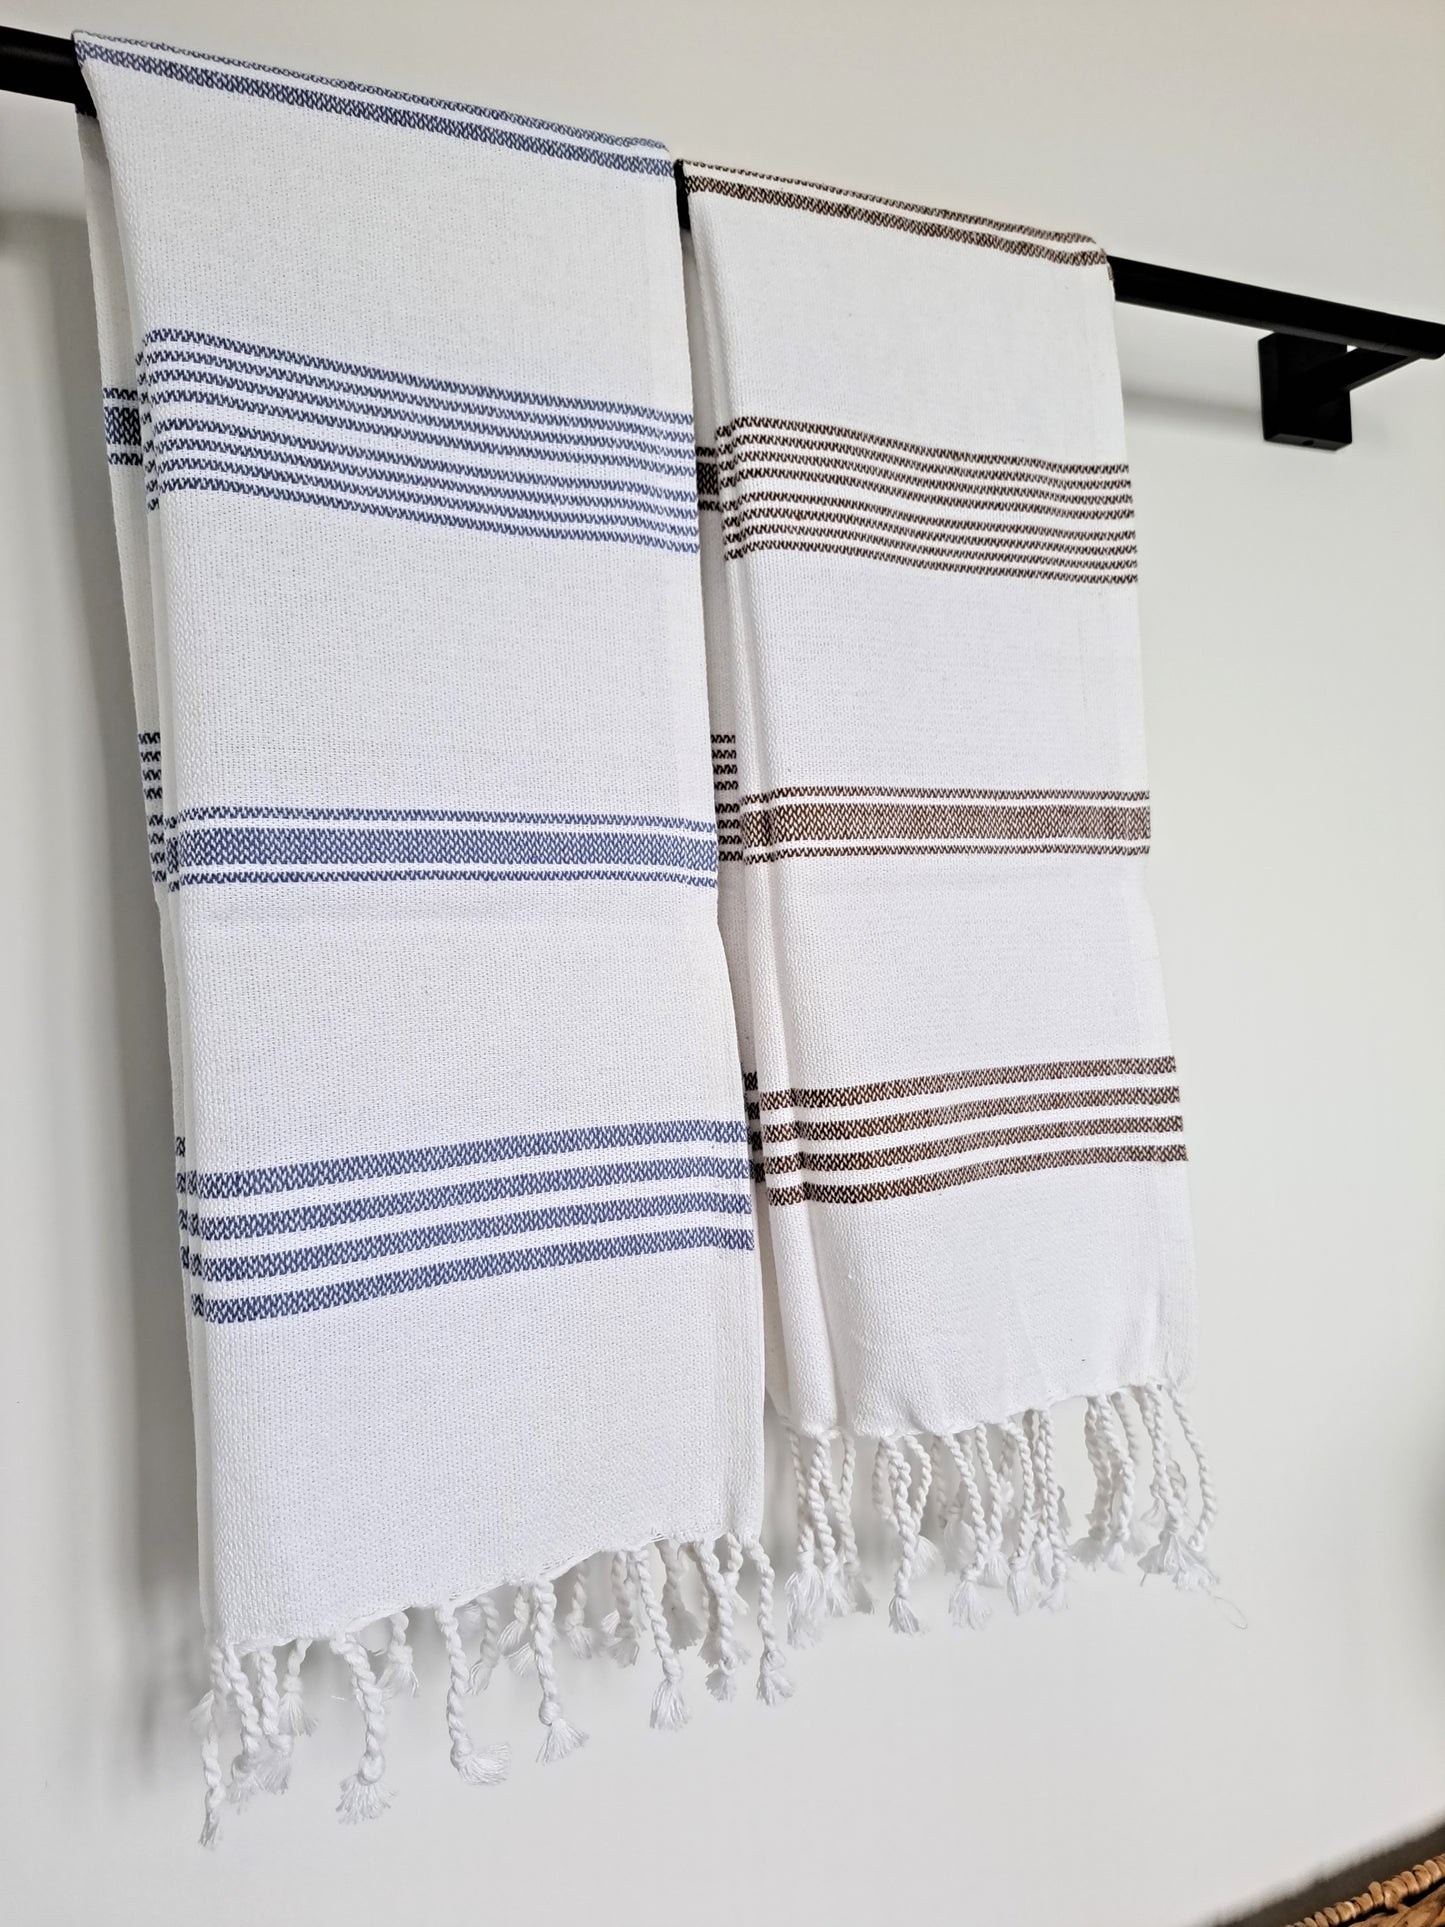 These brown striped handwoven hand towels work perfectly for a farmhouse style, adding an artisanal touch to your space. Great for the kitchen or bathroom.